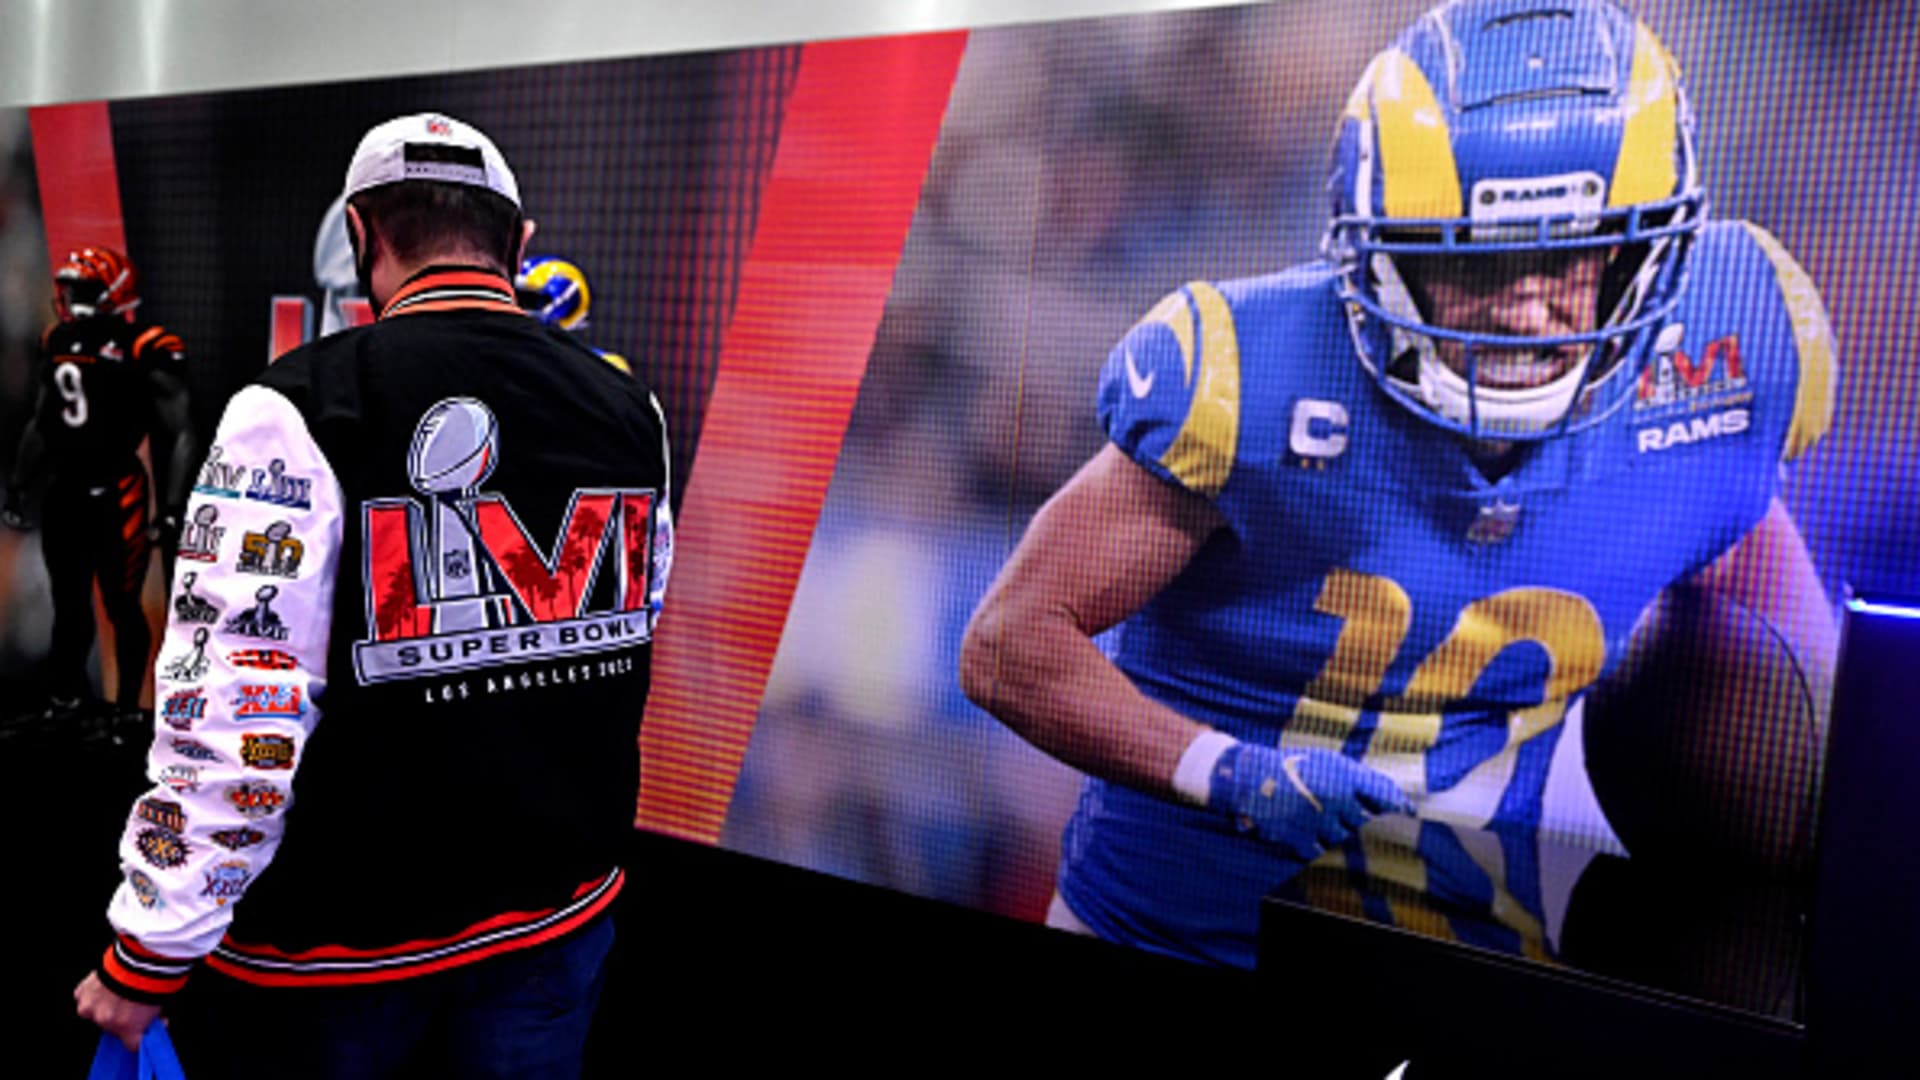 A fan wearing a super boal jacket walks past a giant picture of Los Angeles Rams Cooper Kupp during the Super Bowl Experience at the Los Angeles Convention Center in Los Angeles on Saturday, February 5, 2022.